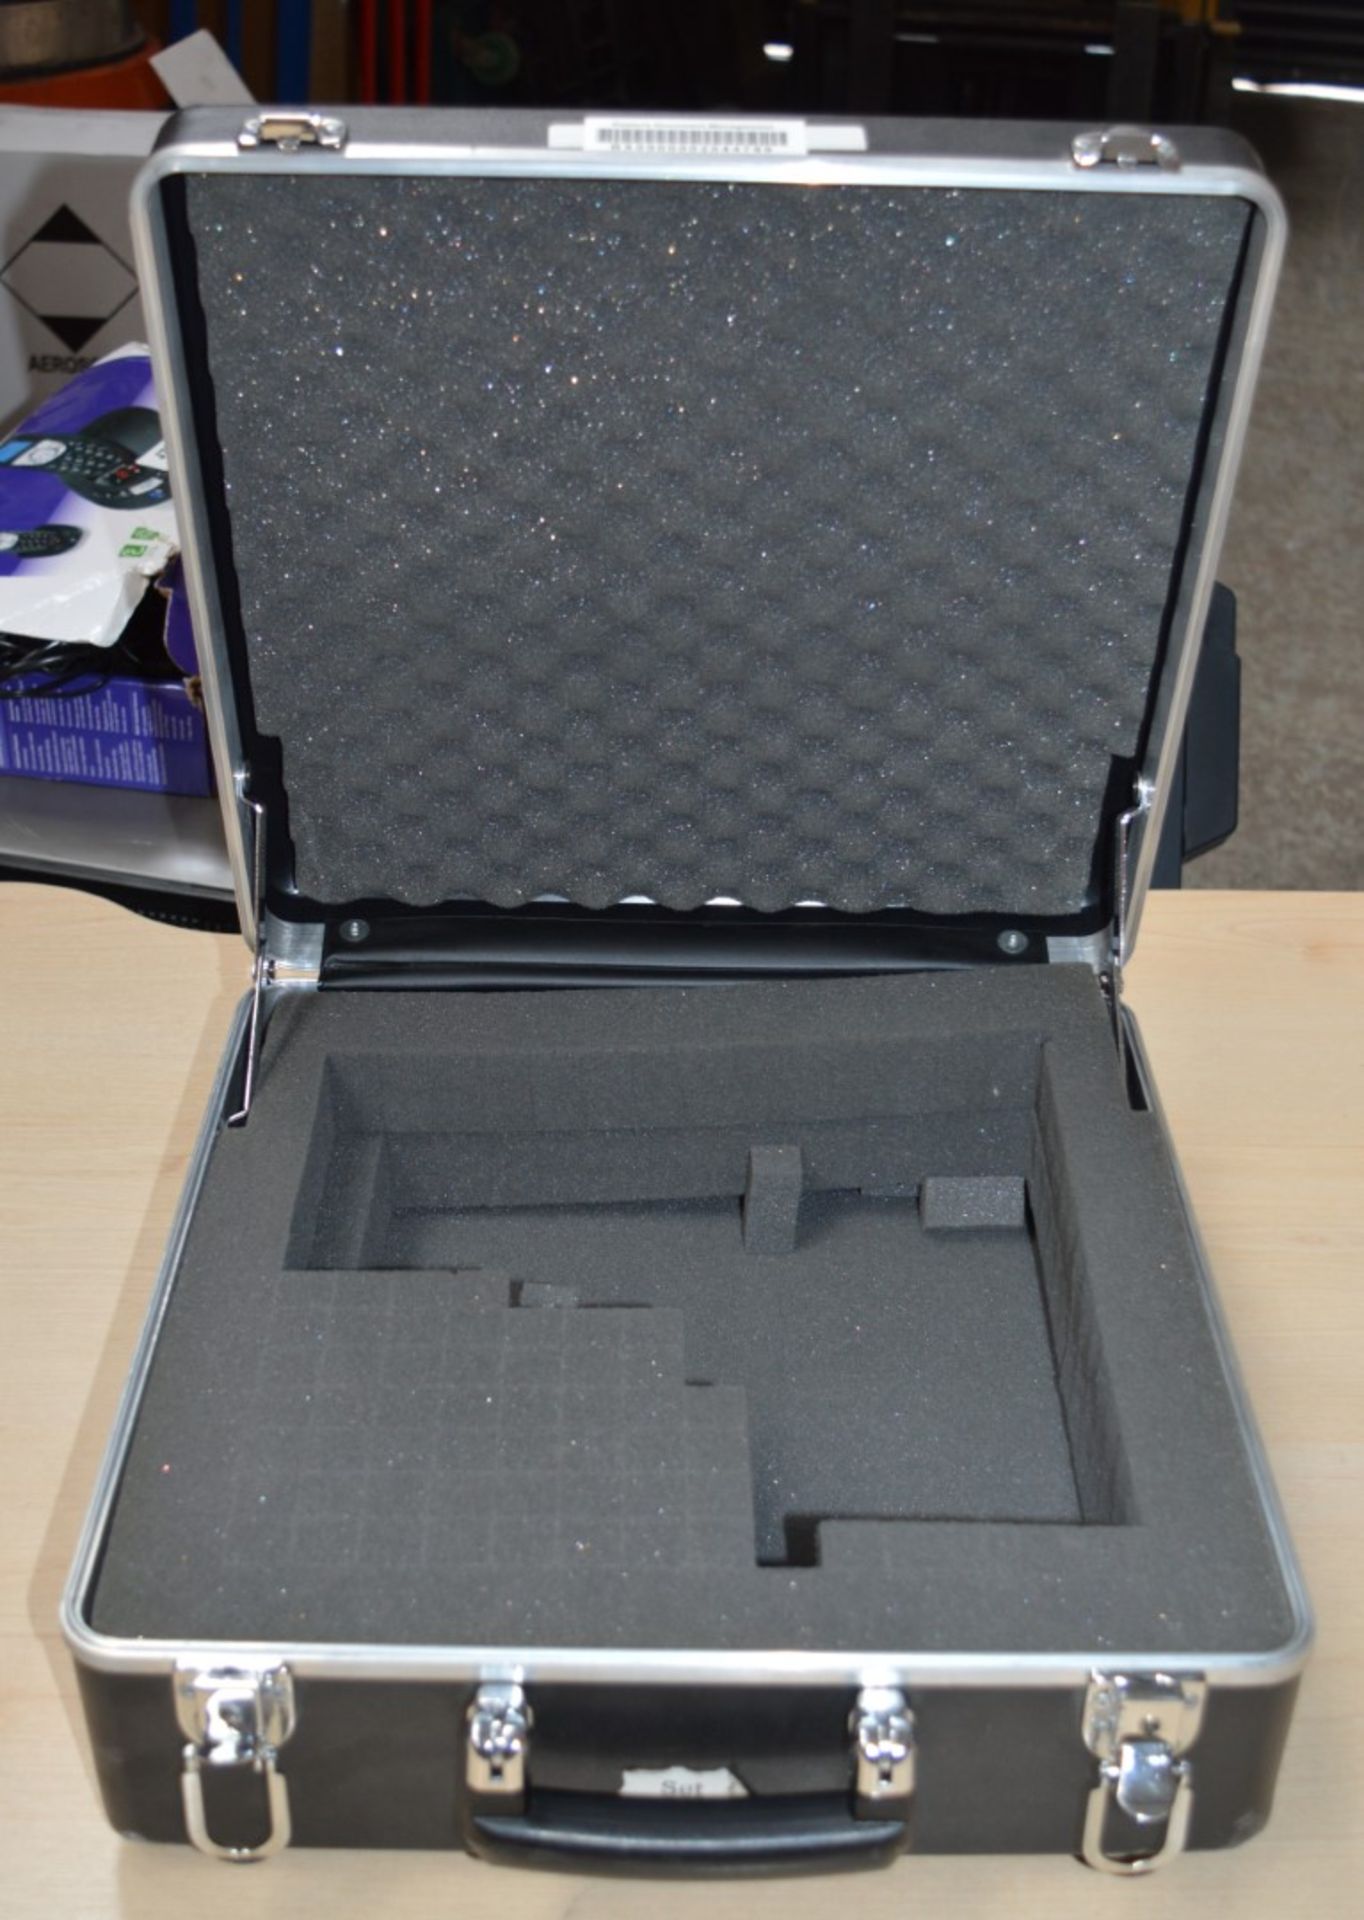 1 x Hard Shell Data Cassette Carry Case - 36 x 36 x 16 cms - CL285 - Ref J727 - Location: Altrincham - Image 2 of 2